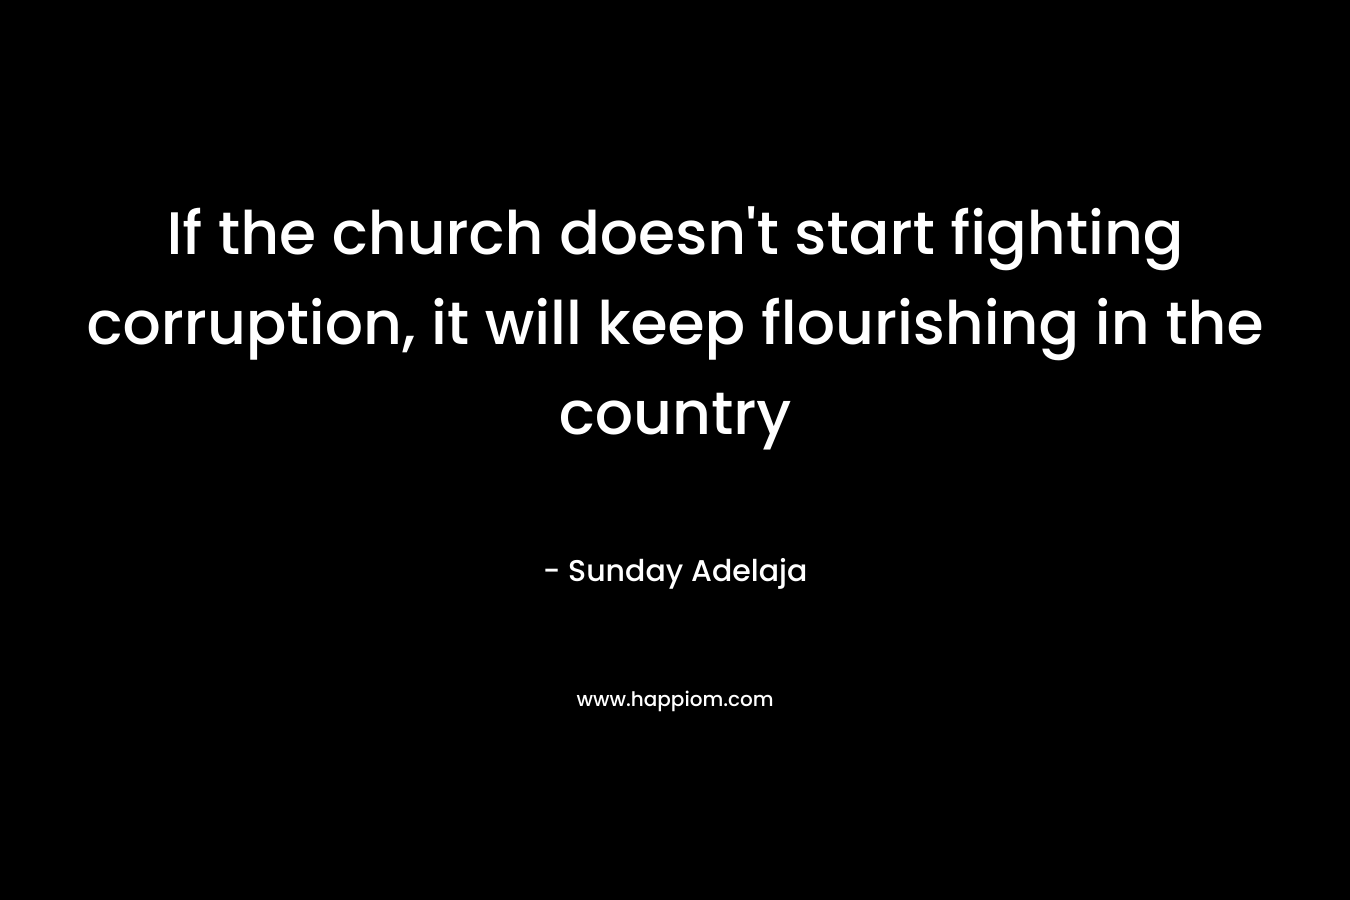 If the church doesn’t start fighting corruption, it will keep flourishing in the country – Sunday Adelaja